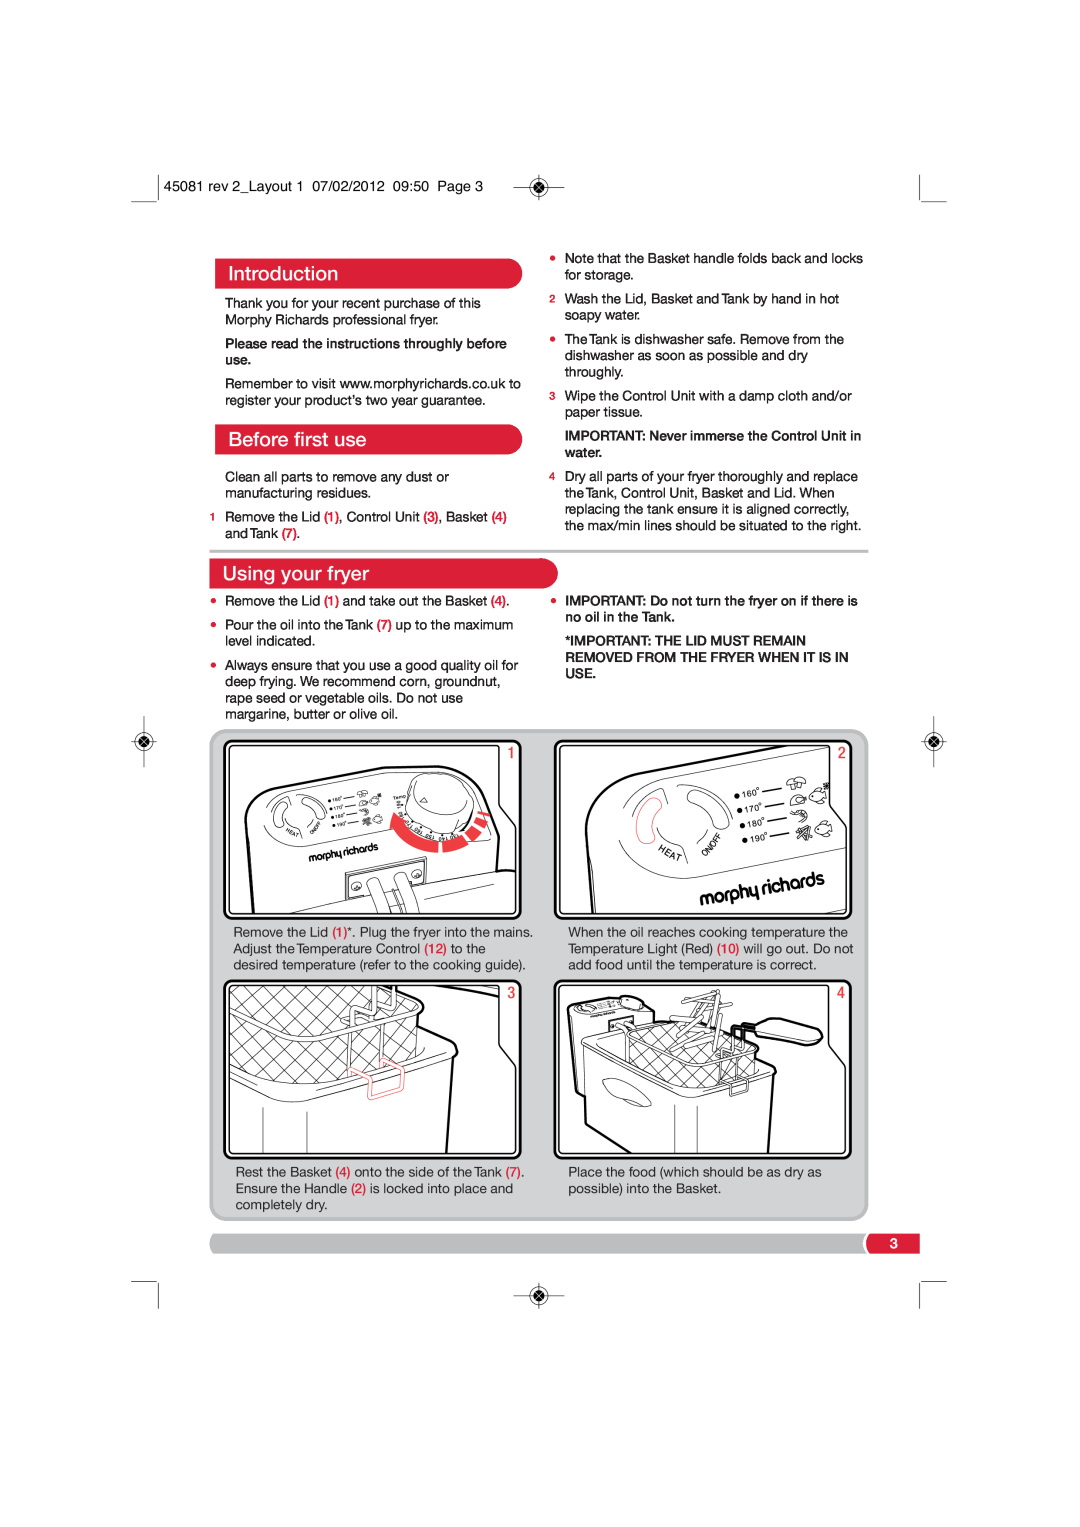 Morphy Richards 45081 manual Introduction, Before first use, Using your fryer, rev 2Layout 1 07/02/2012 0950 Page 